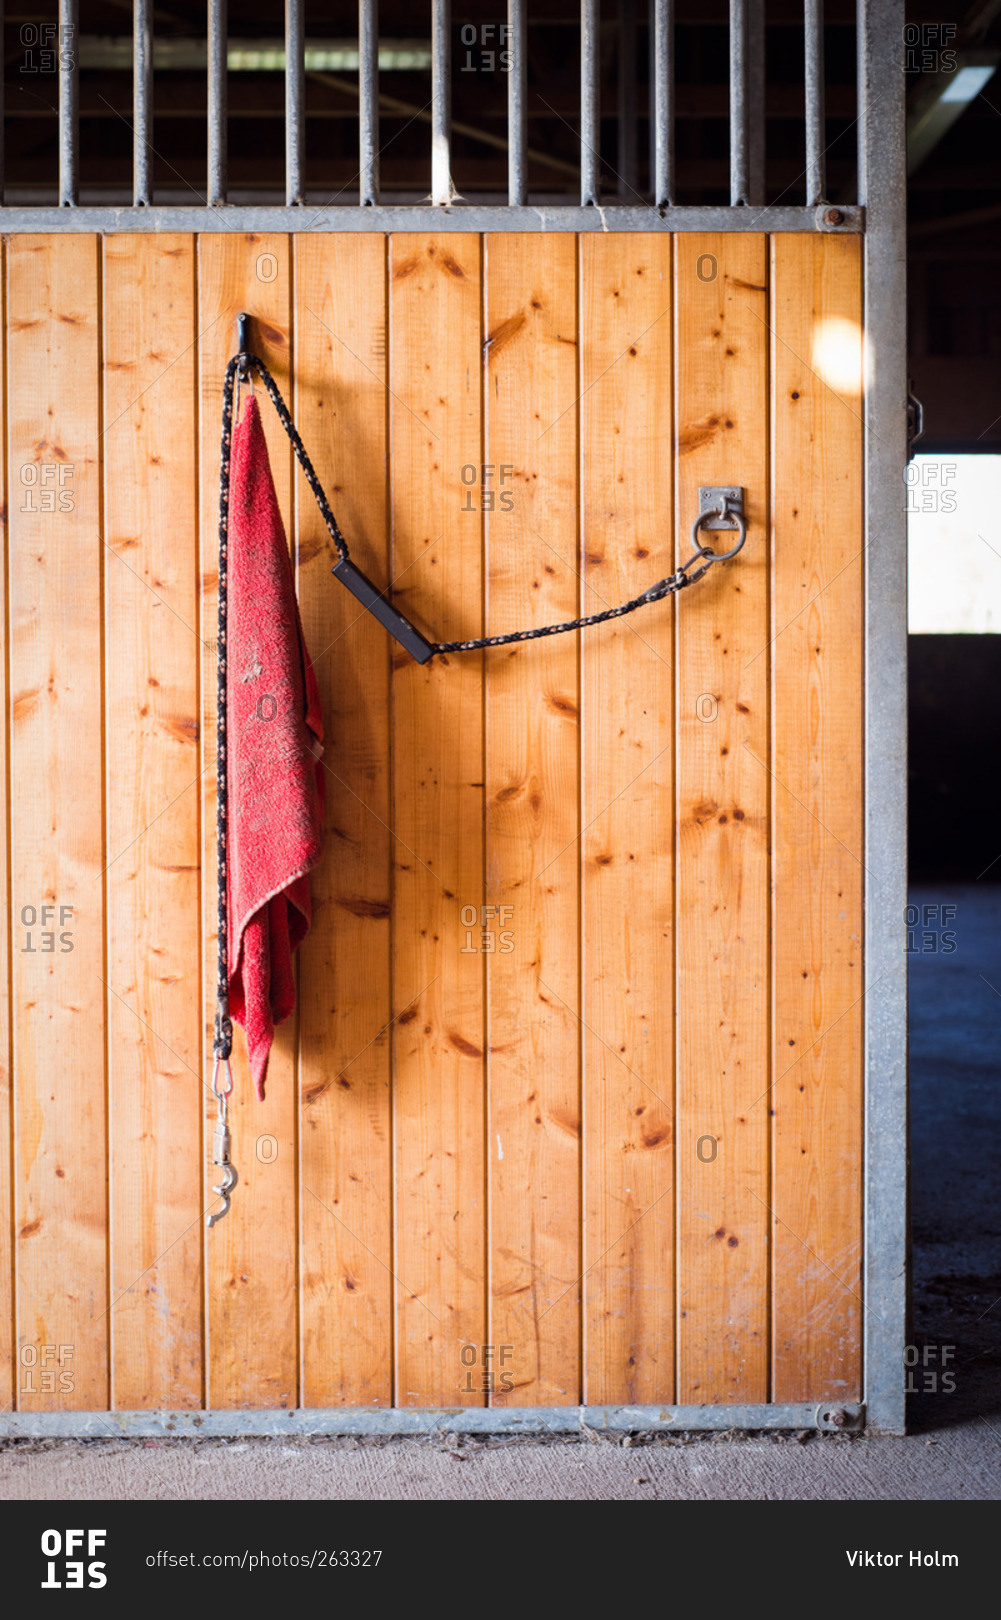 Lead rope and towel hanging in a horse barn